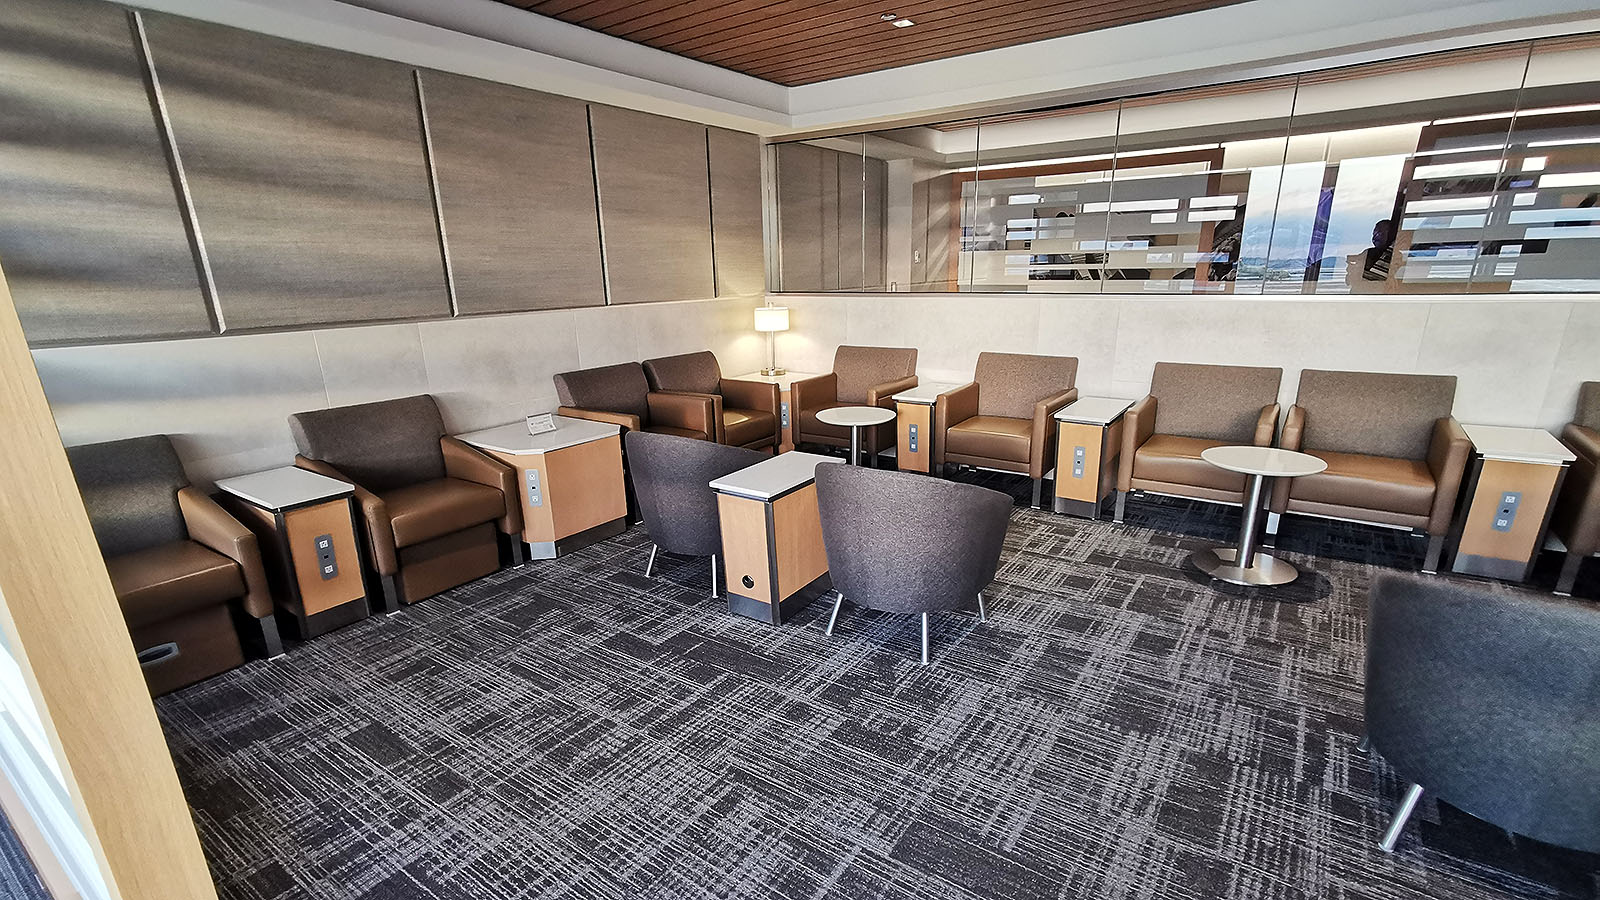 Quiet area at AA's Flagship Lounge in Chicago